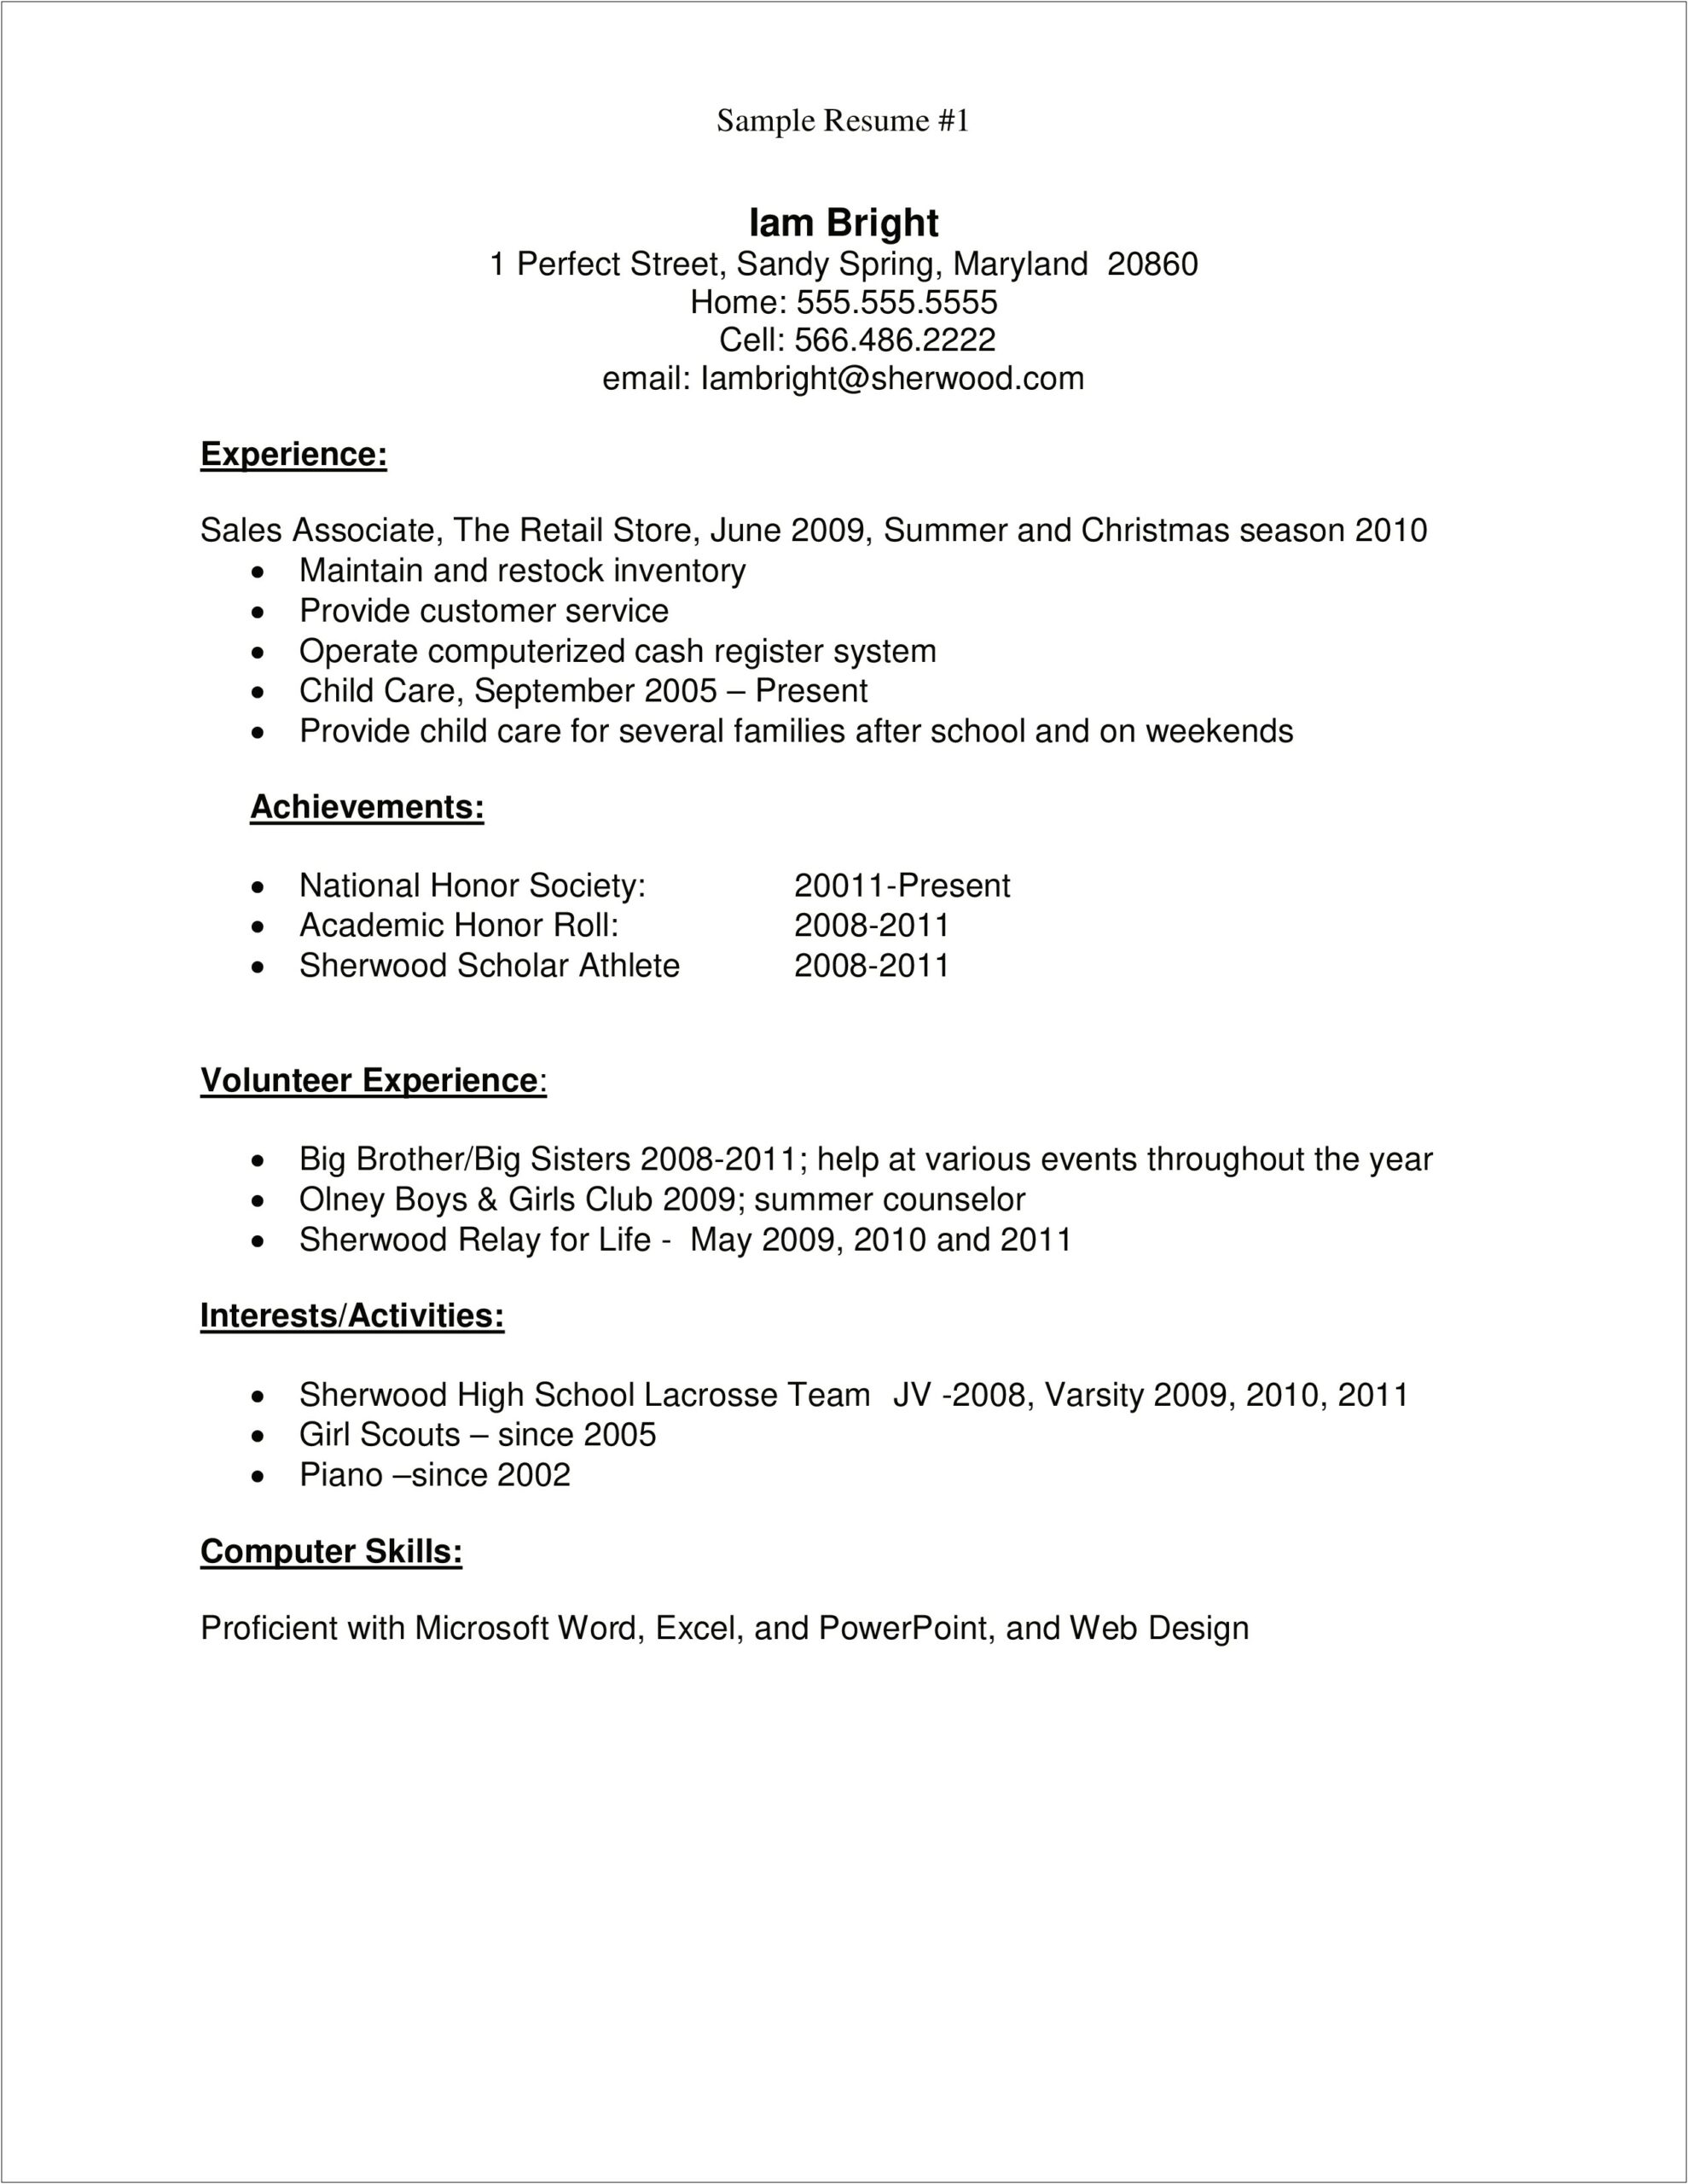 Sample Resume Format For It Students